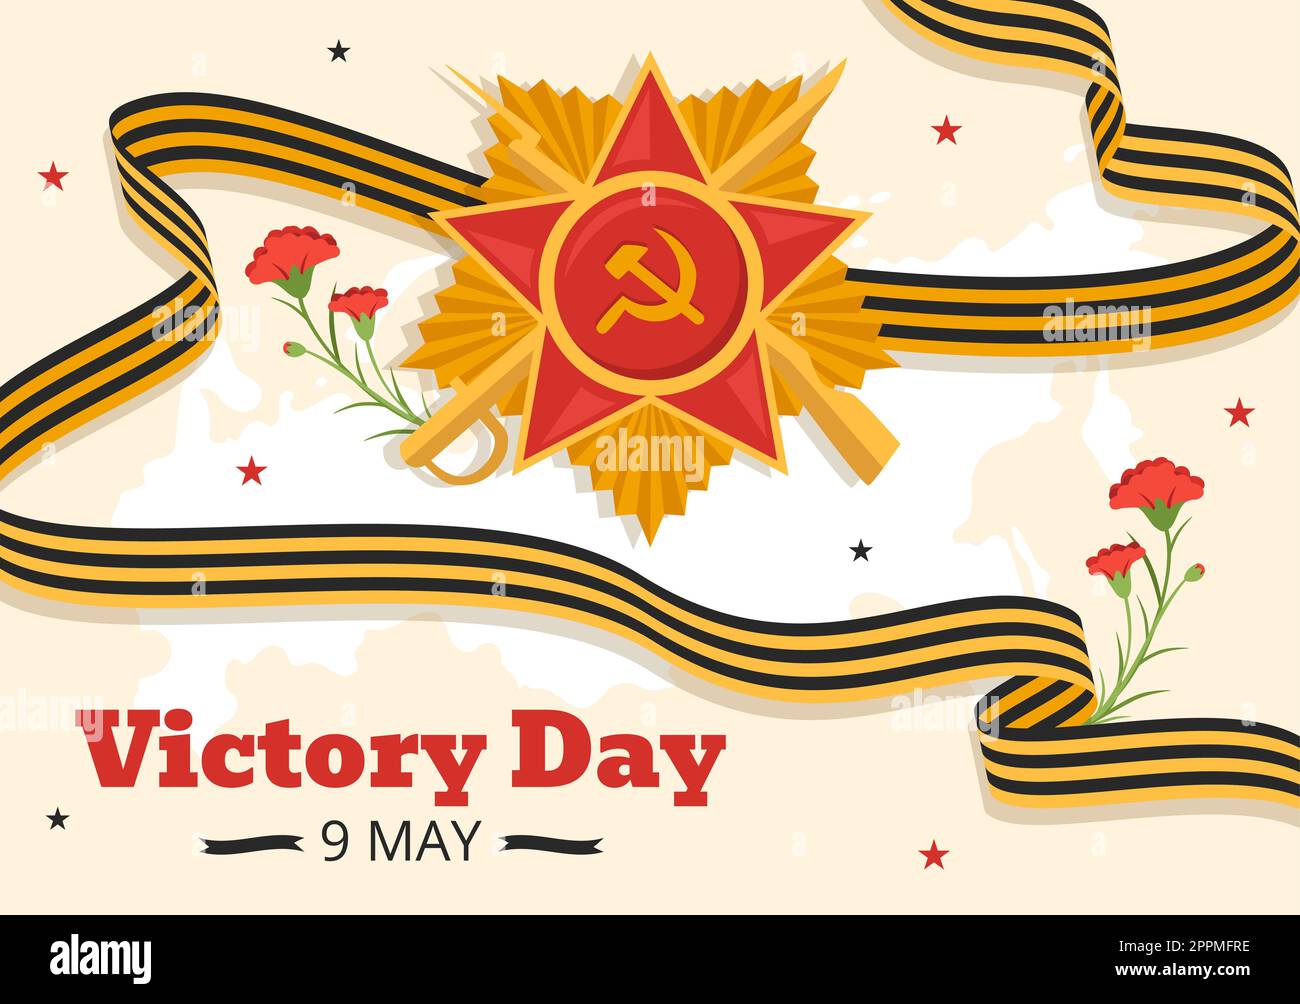 Russian Victory Day on May 9 Illustration with Medal Star Of The Hero and Great Patriotic War in Flat Cartoon Hand Drawn for Landing Page Templates Stock Photo